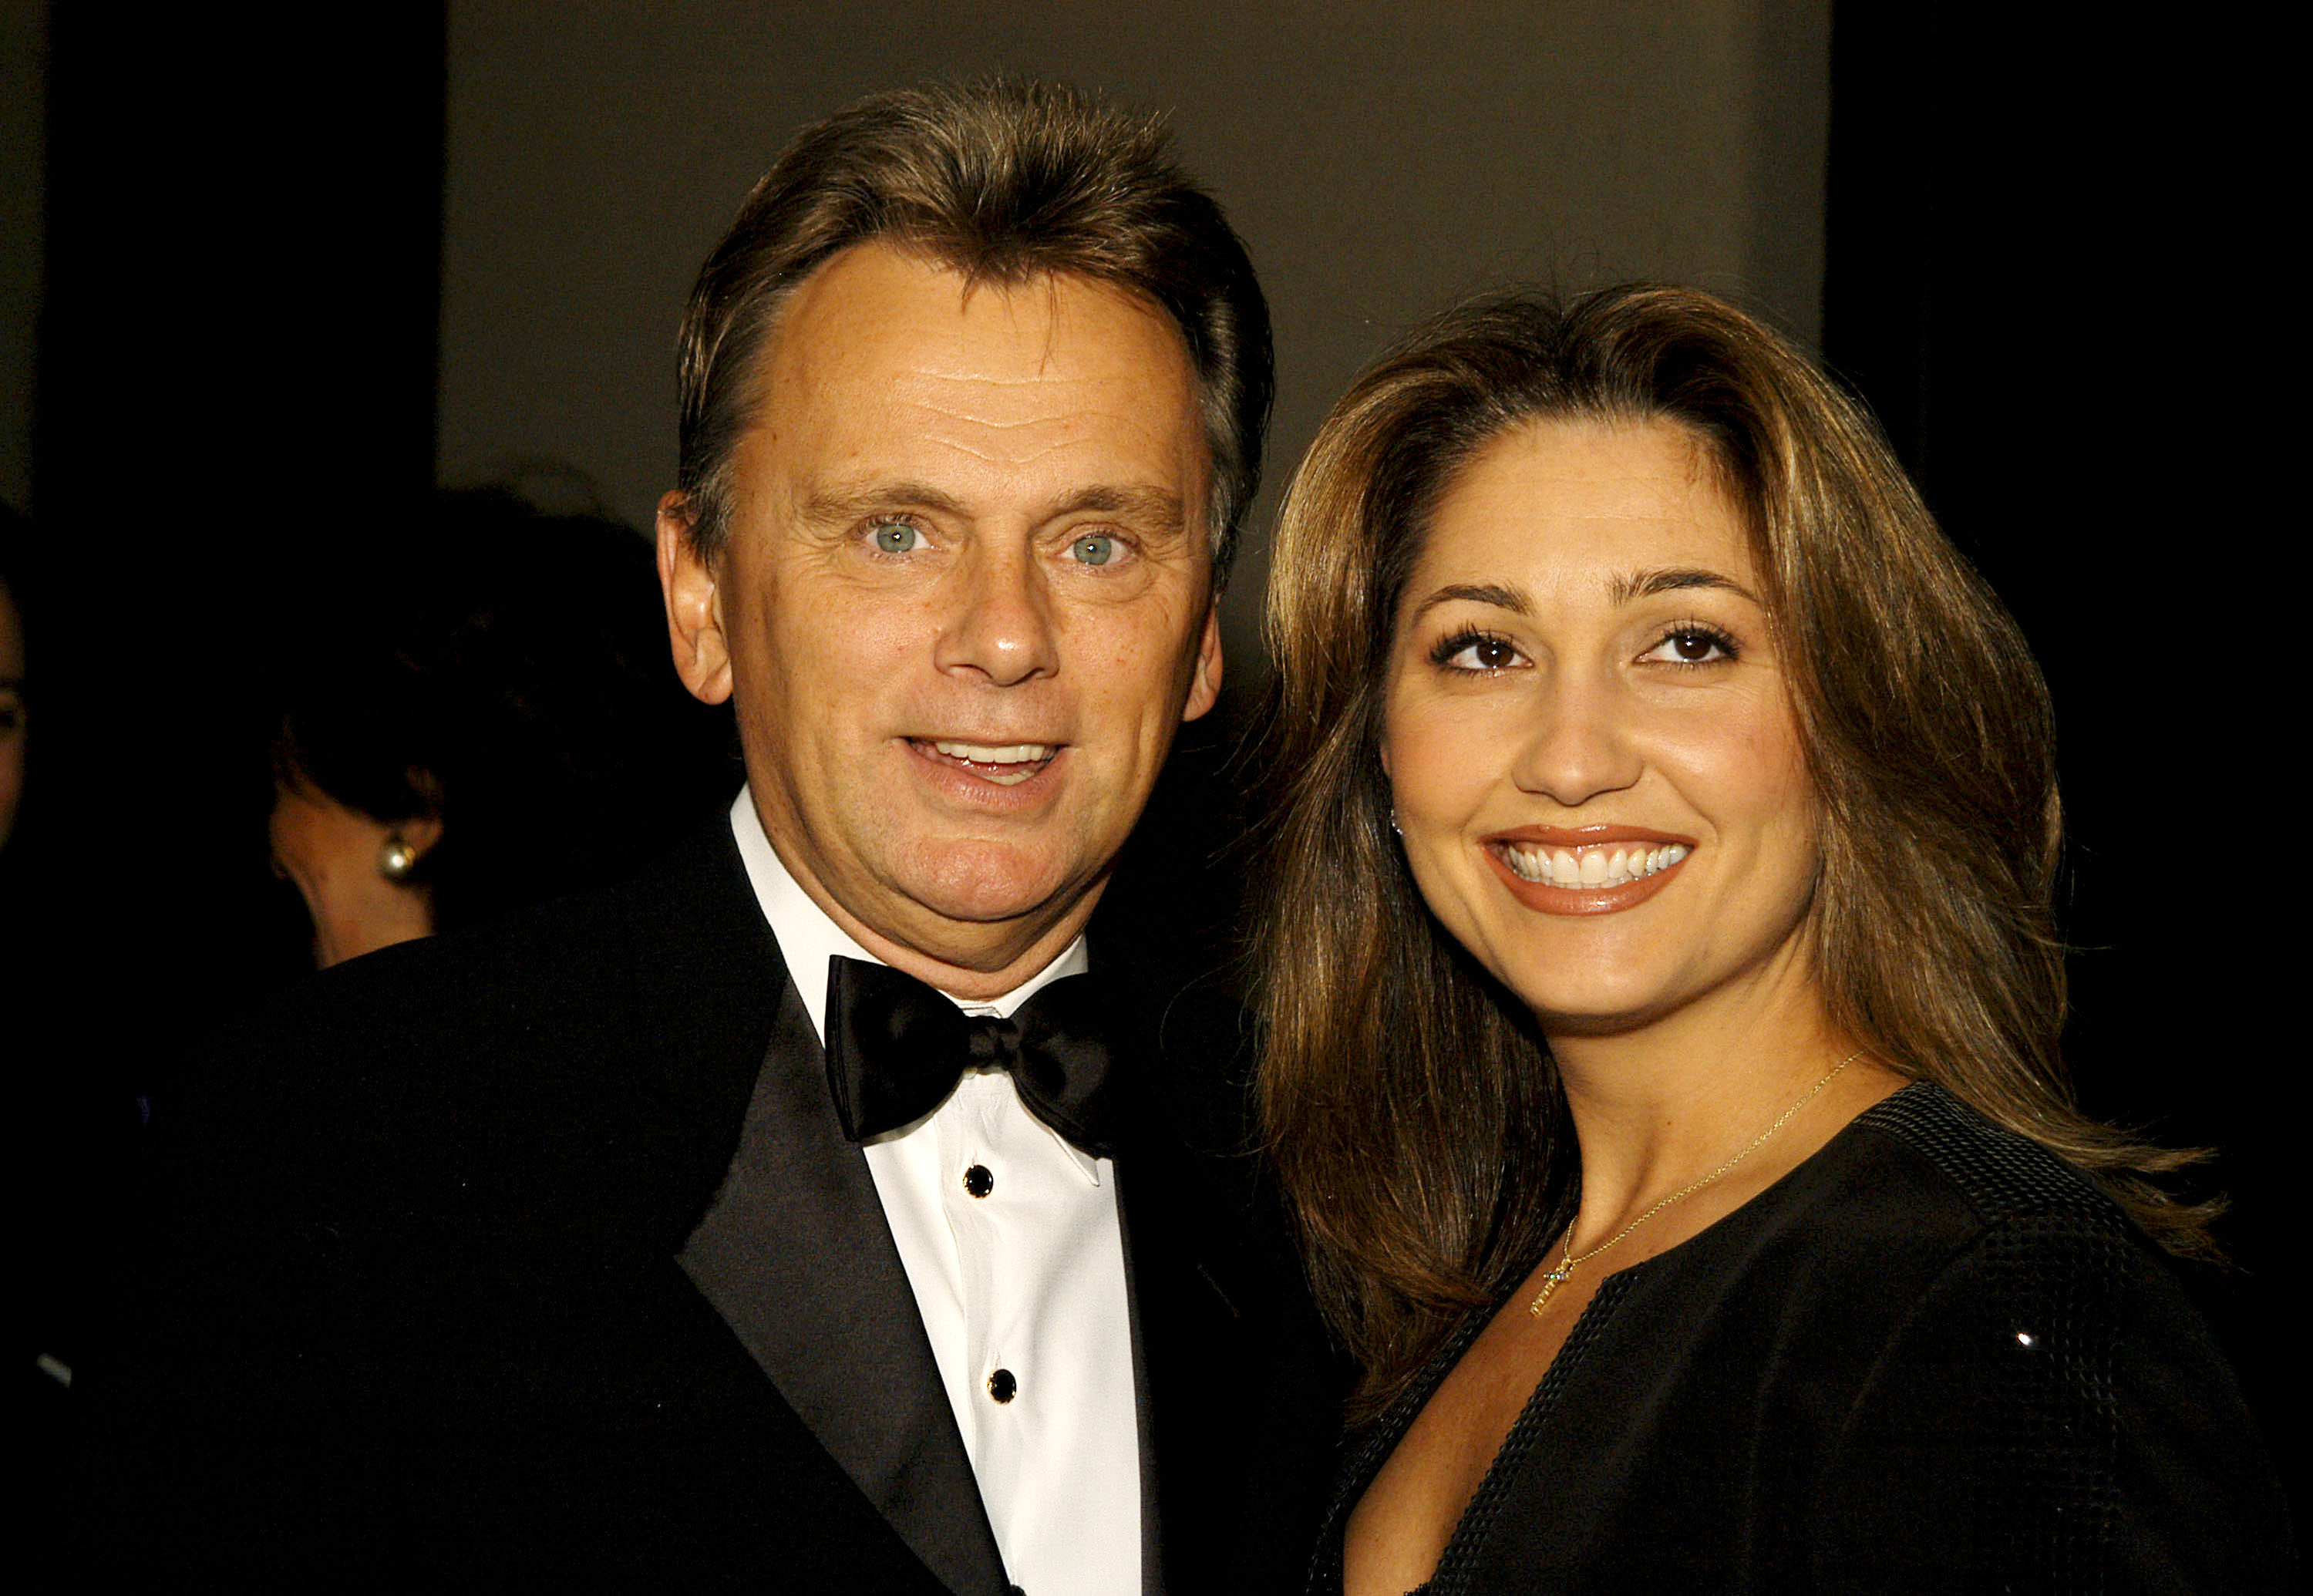 Lesly Brown and Pat Sajak at the 13th Annual Broadcasting & Cable Magazine Hall of Fame event on November 10, 2003 | Source: Getty Images